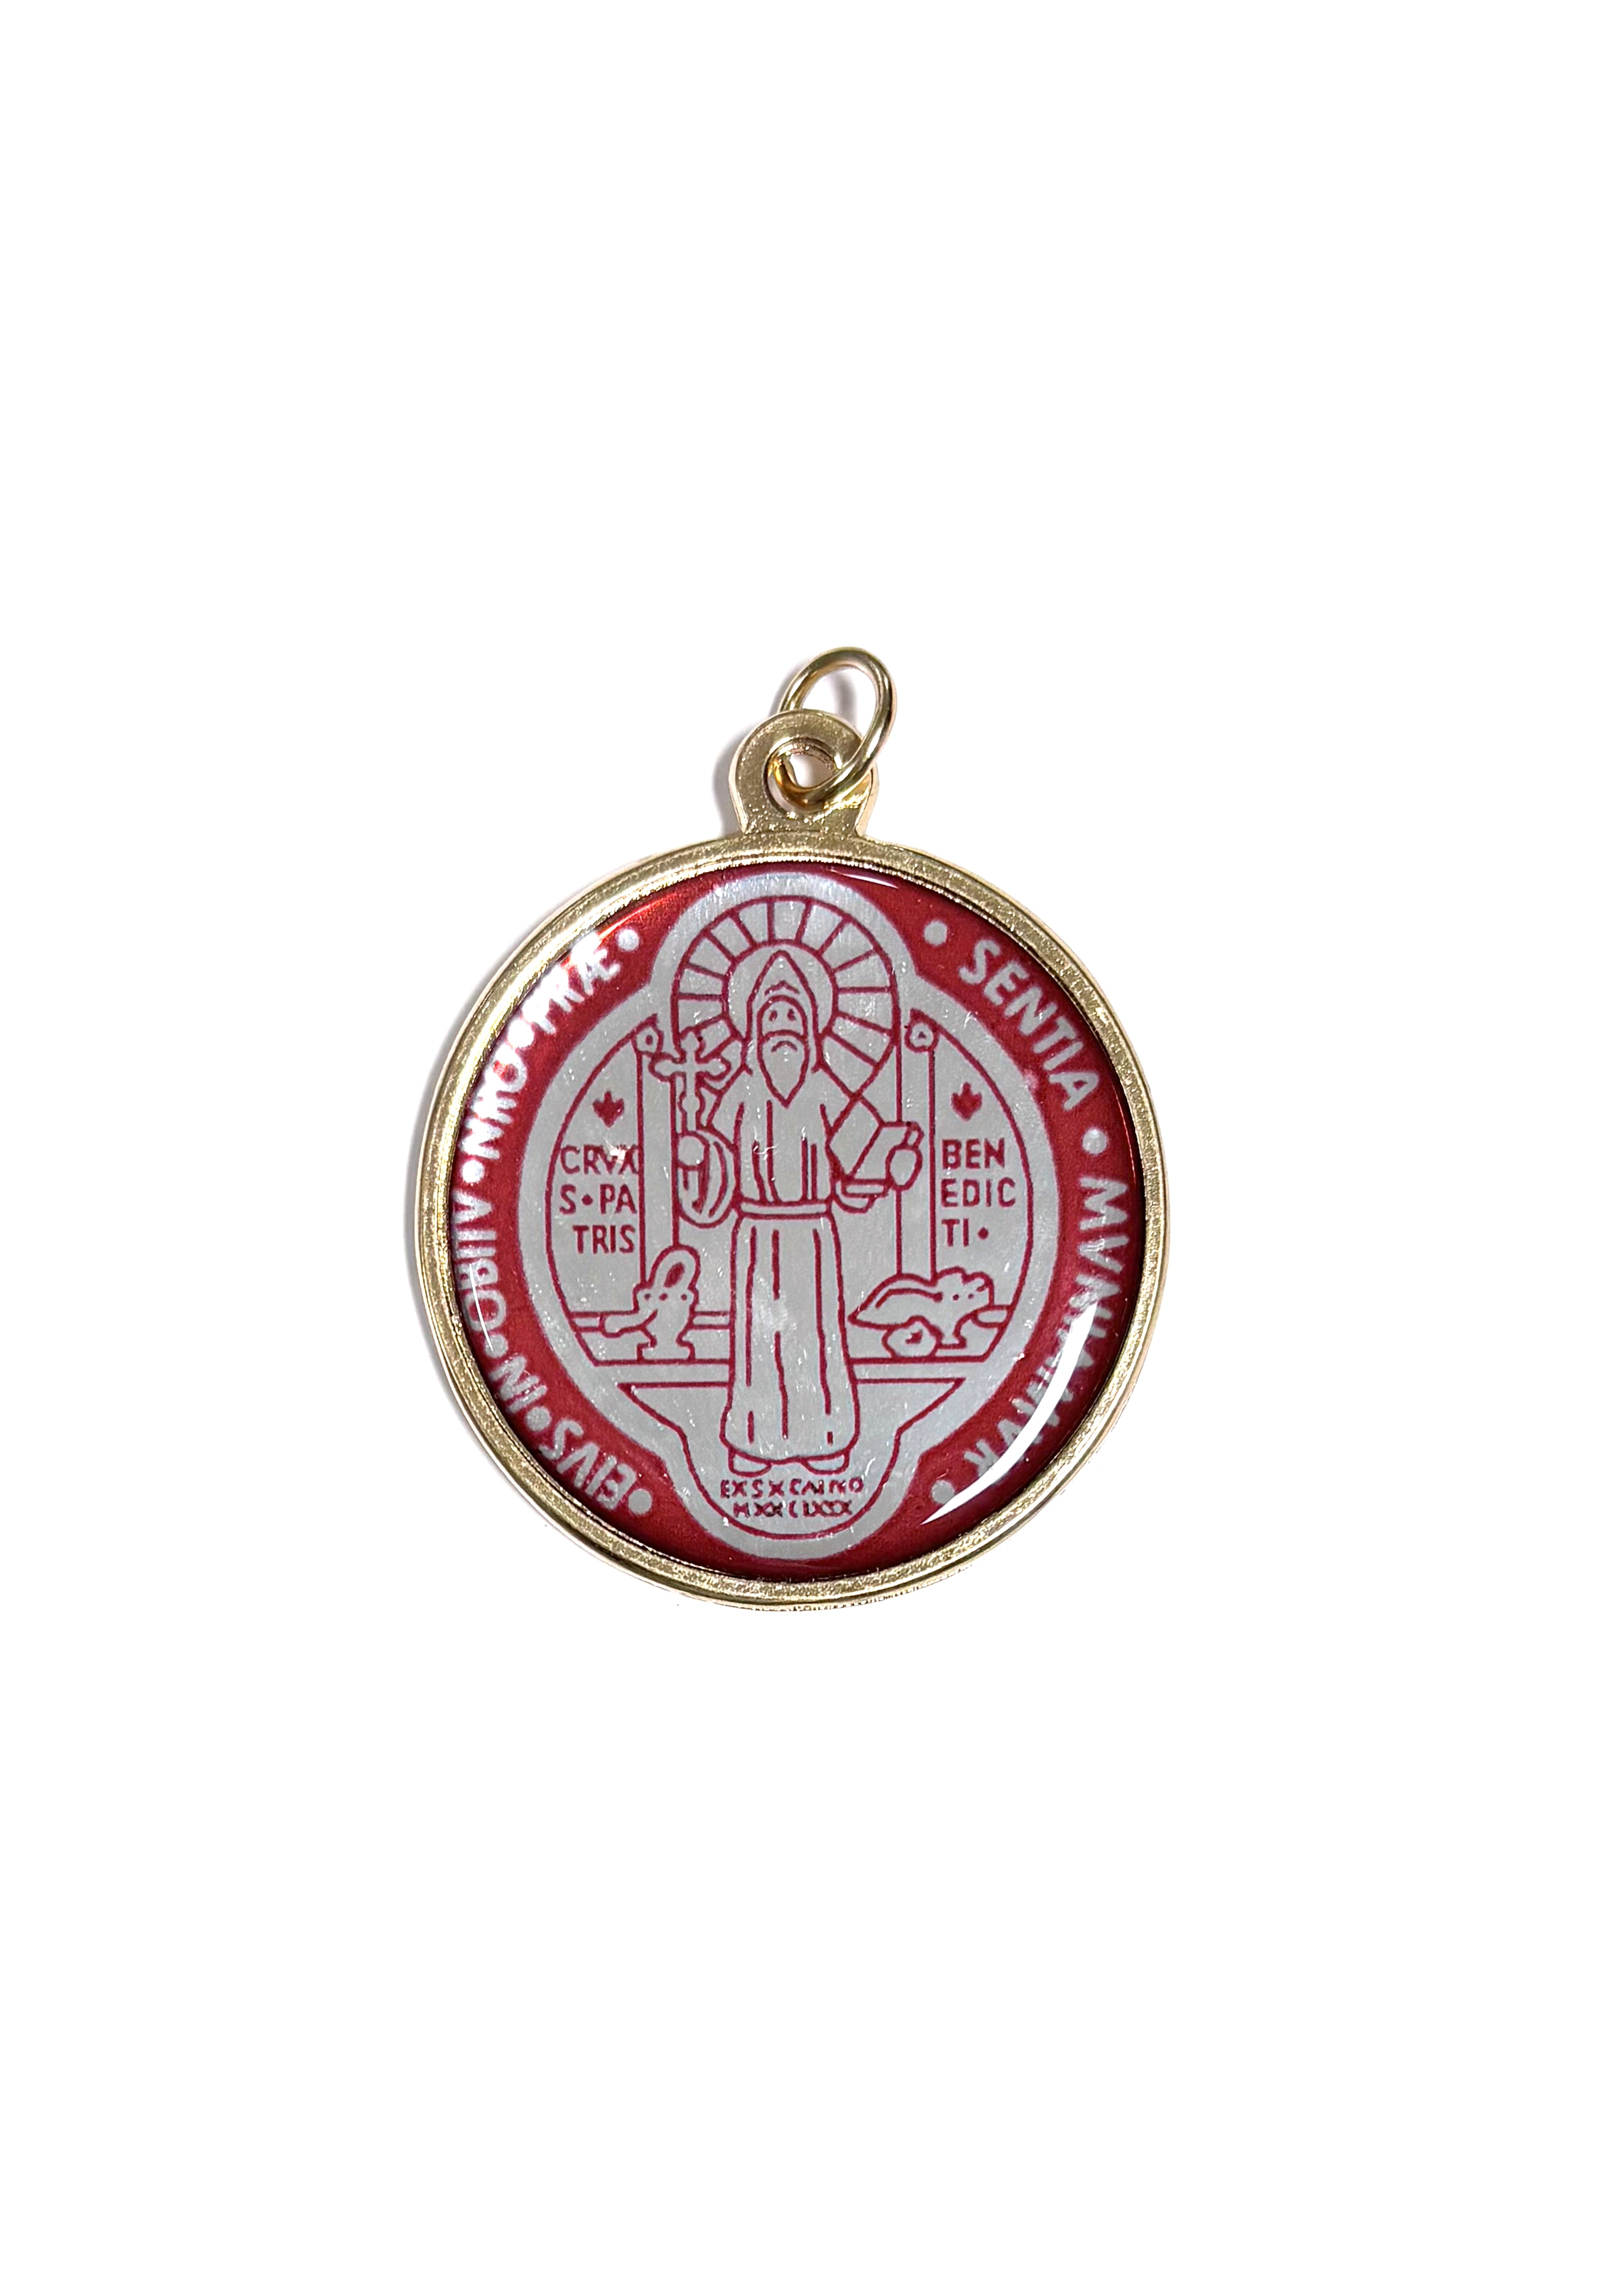 2 Inch Saint Benedict red and gold medal